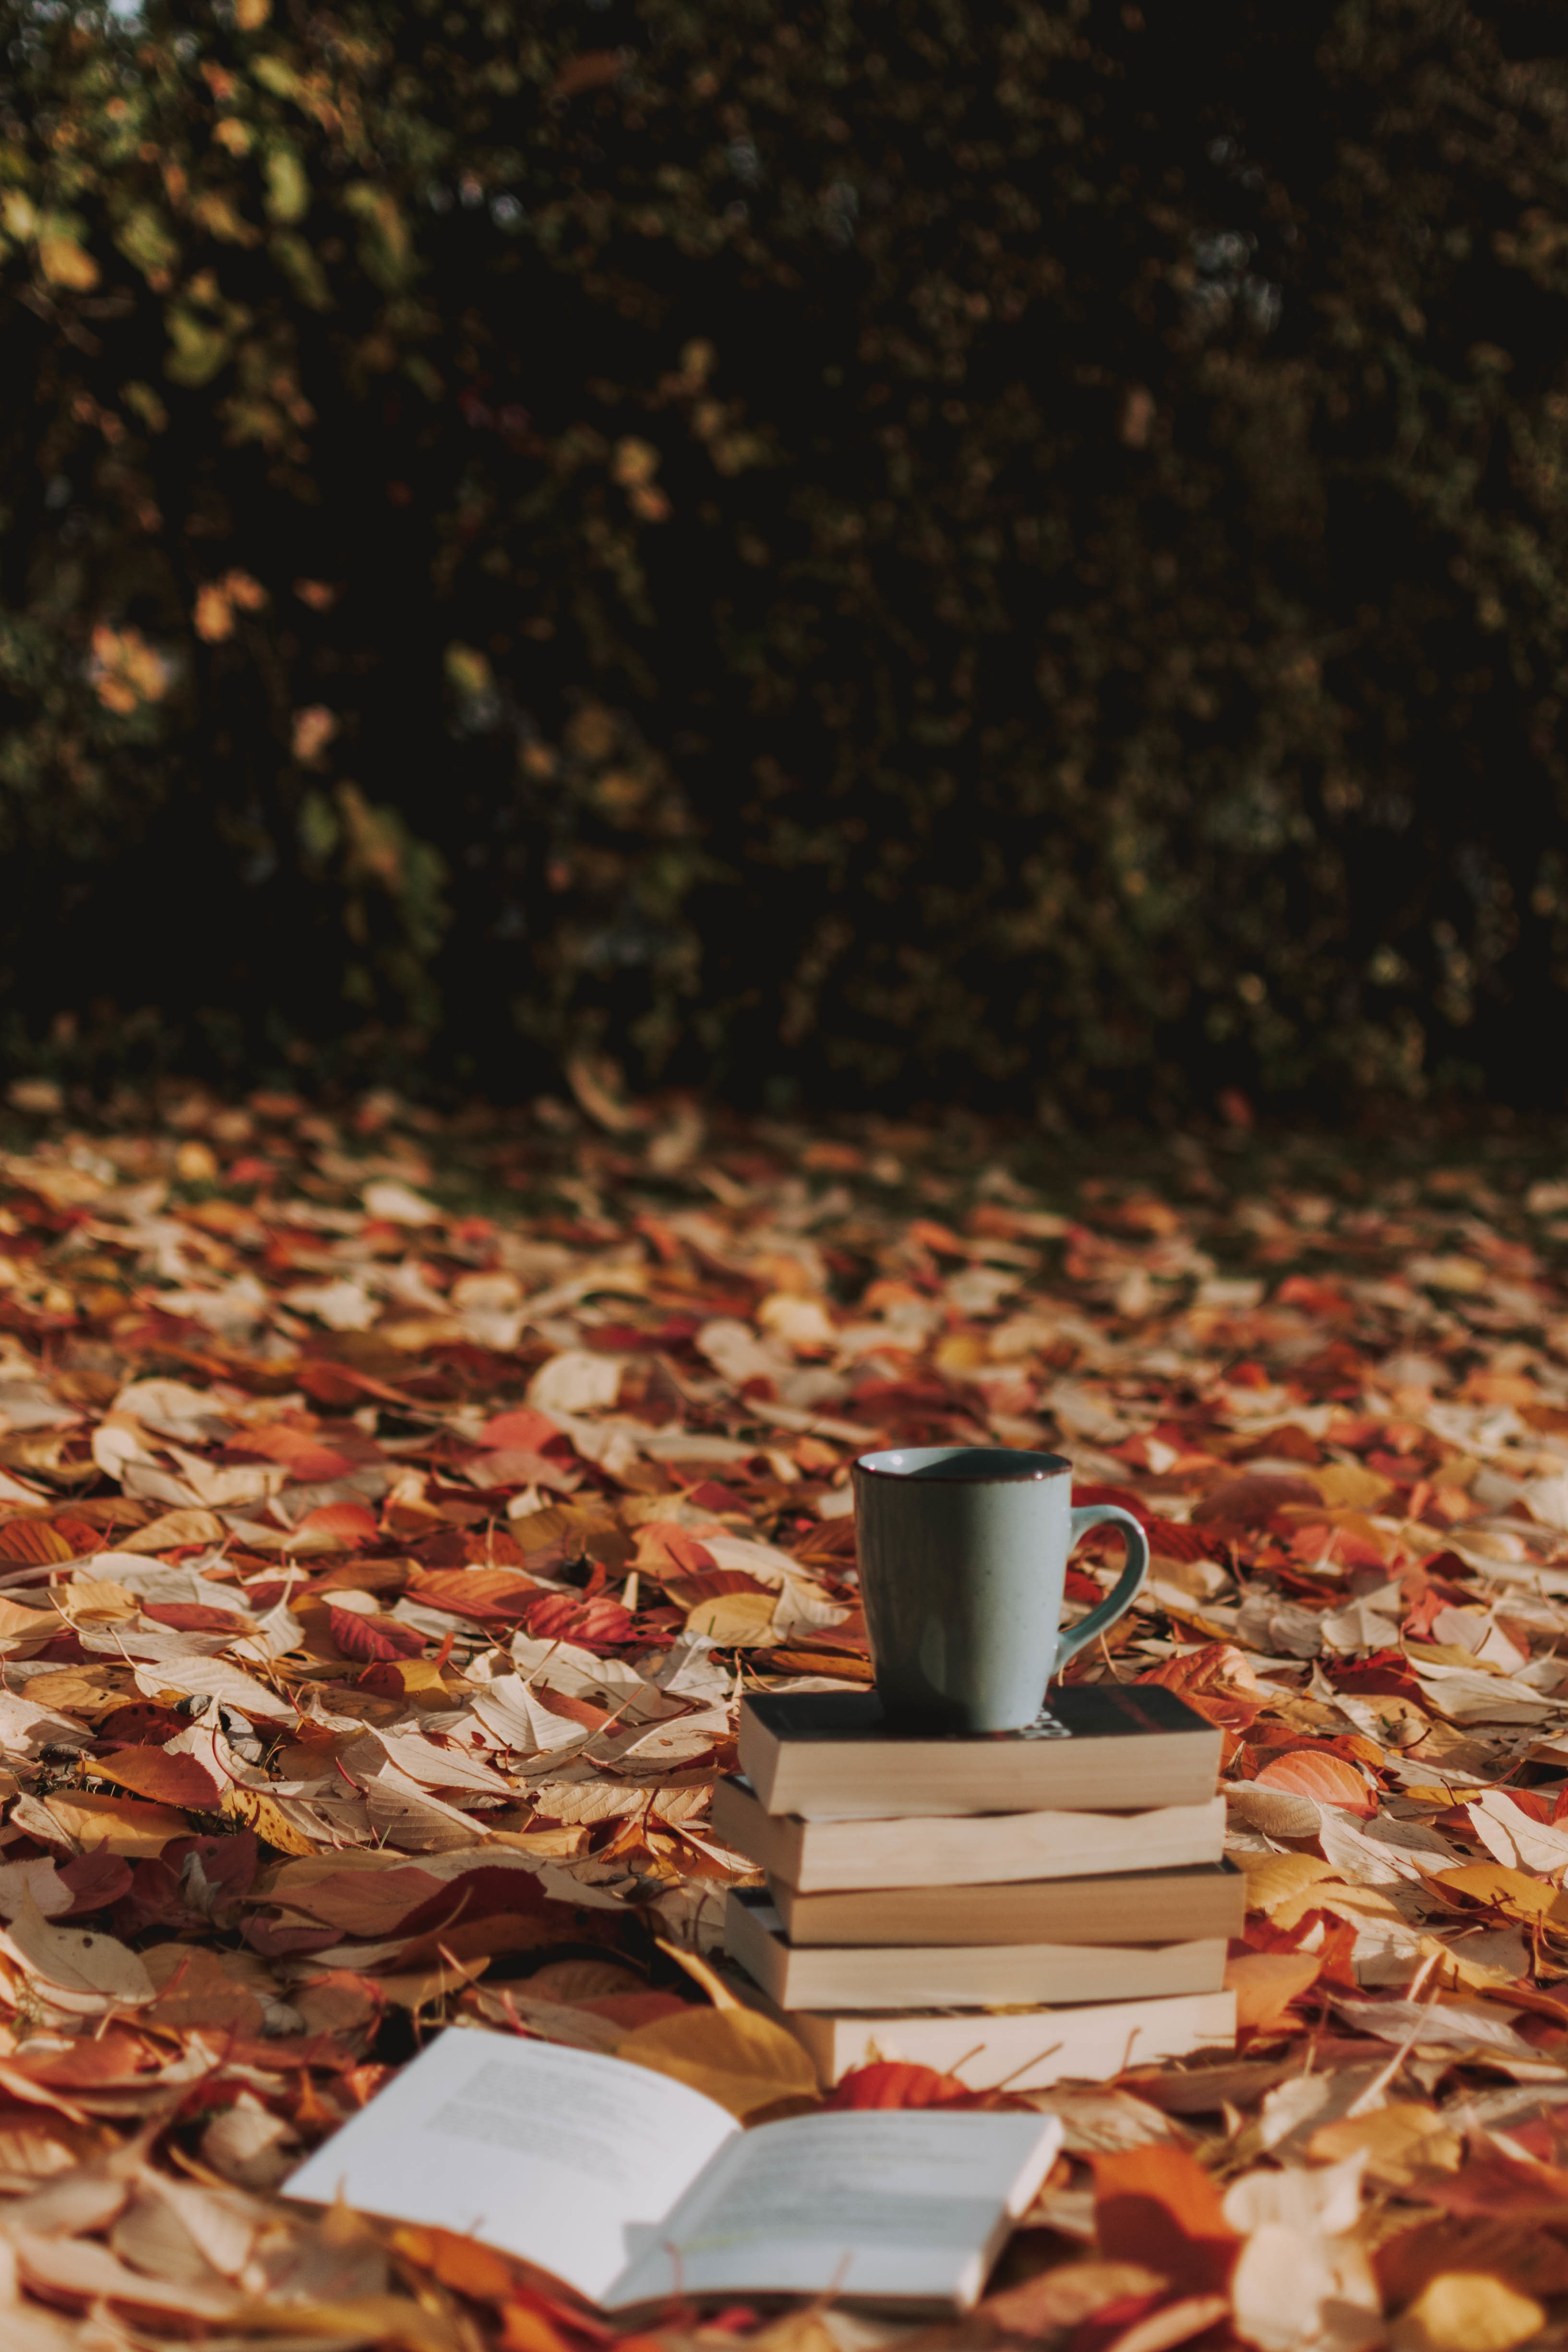 A pile of books sitting on the ground surrounded by leaves with a coffee cup on top.